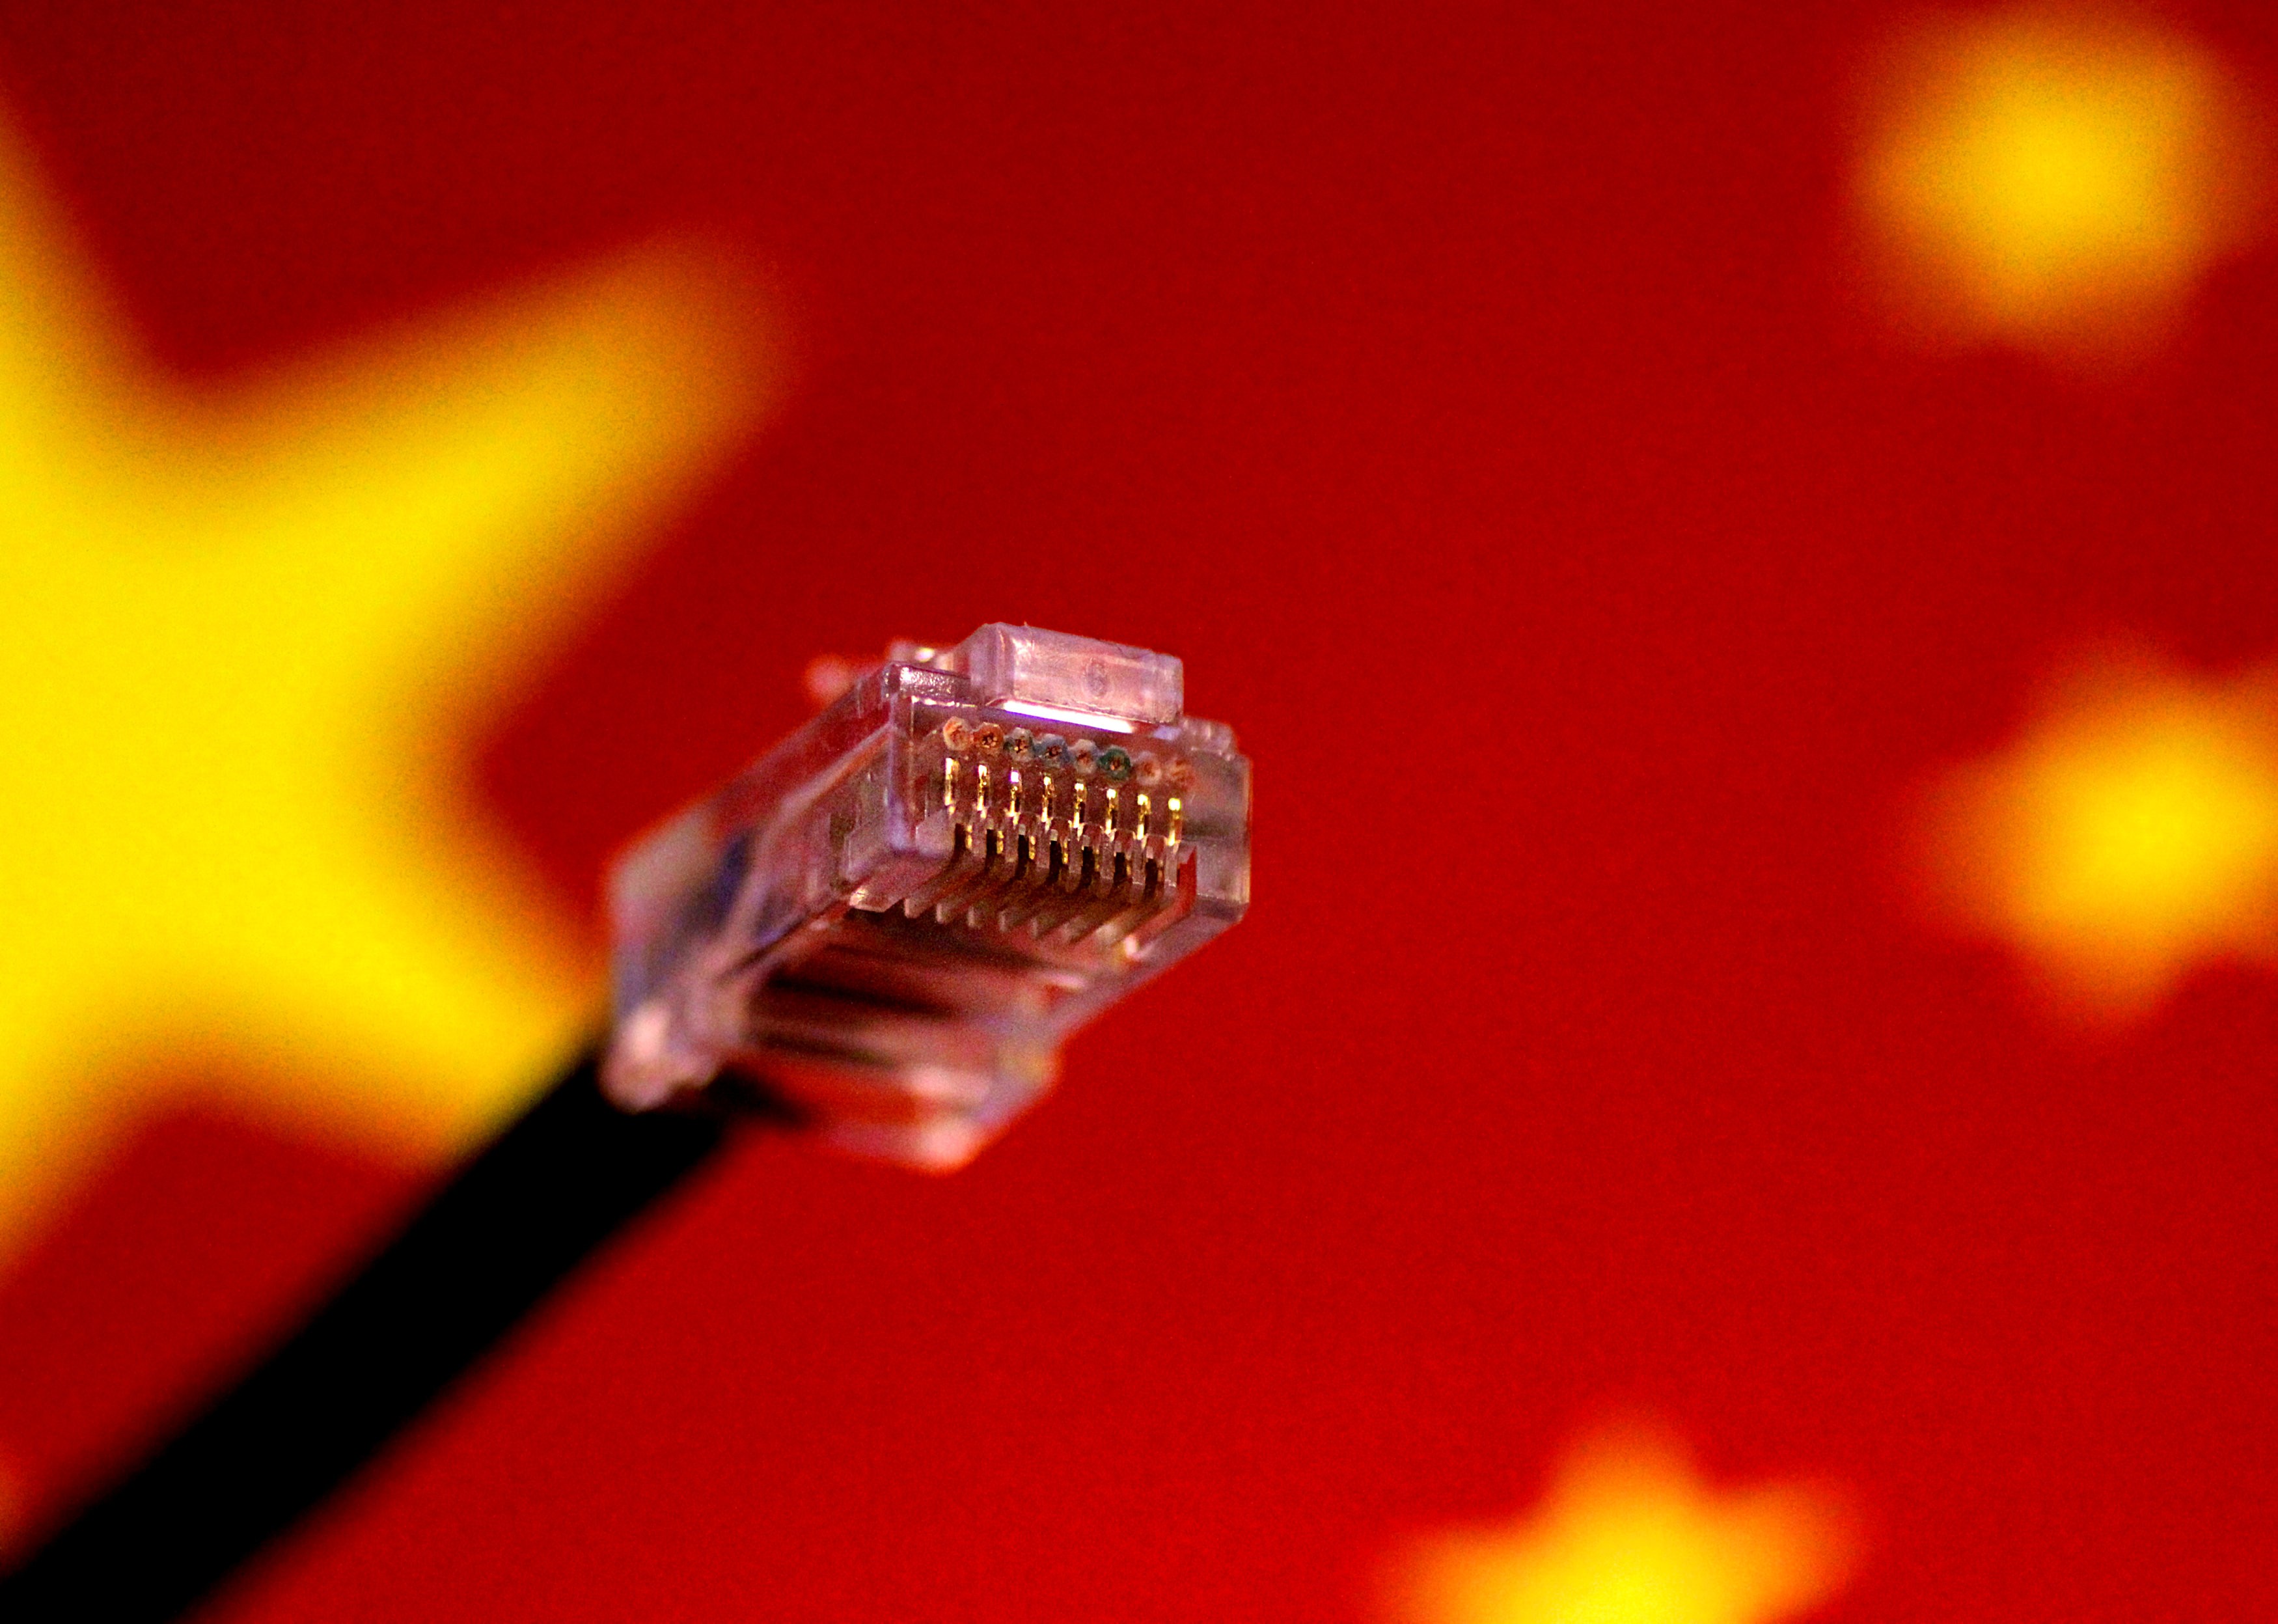 The ambitions of Chinese tech giants like Huawei, which have laid thousands of kilometres of cable, are of increasing concern to Washington. Photo: Reuters